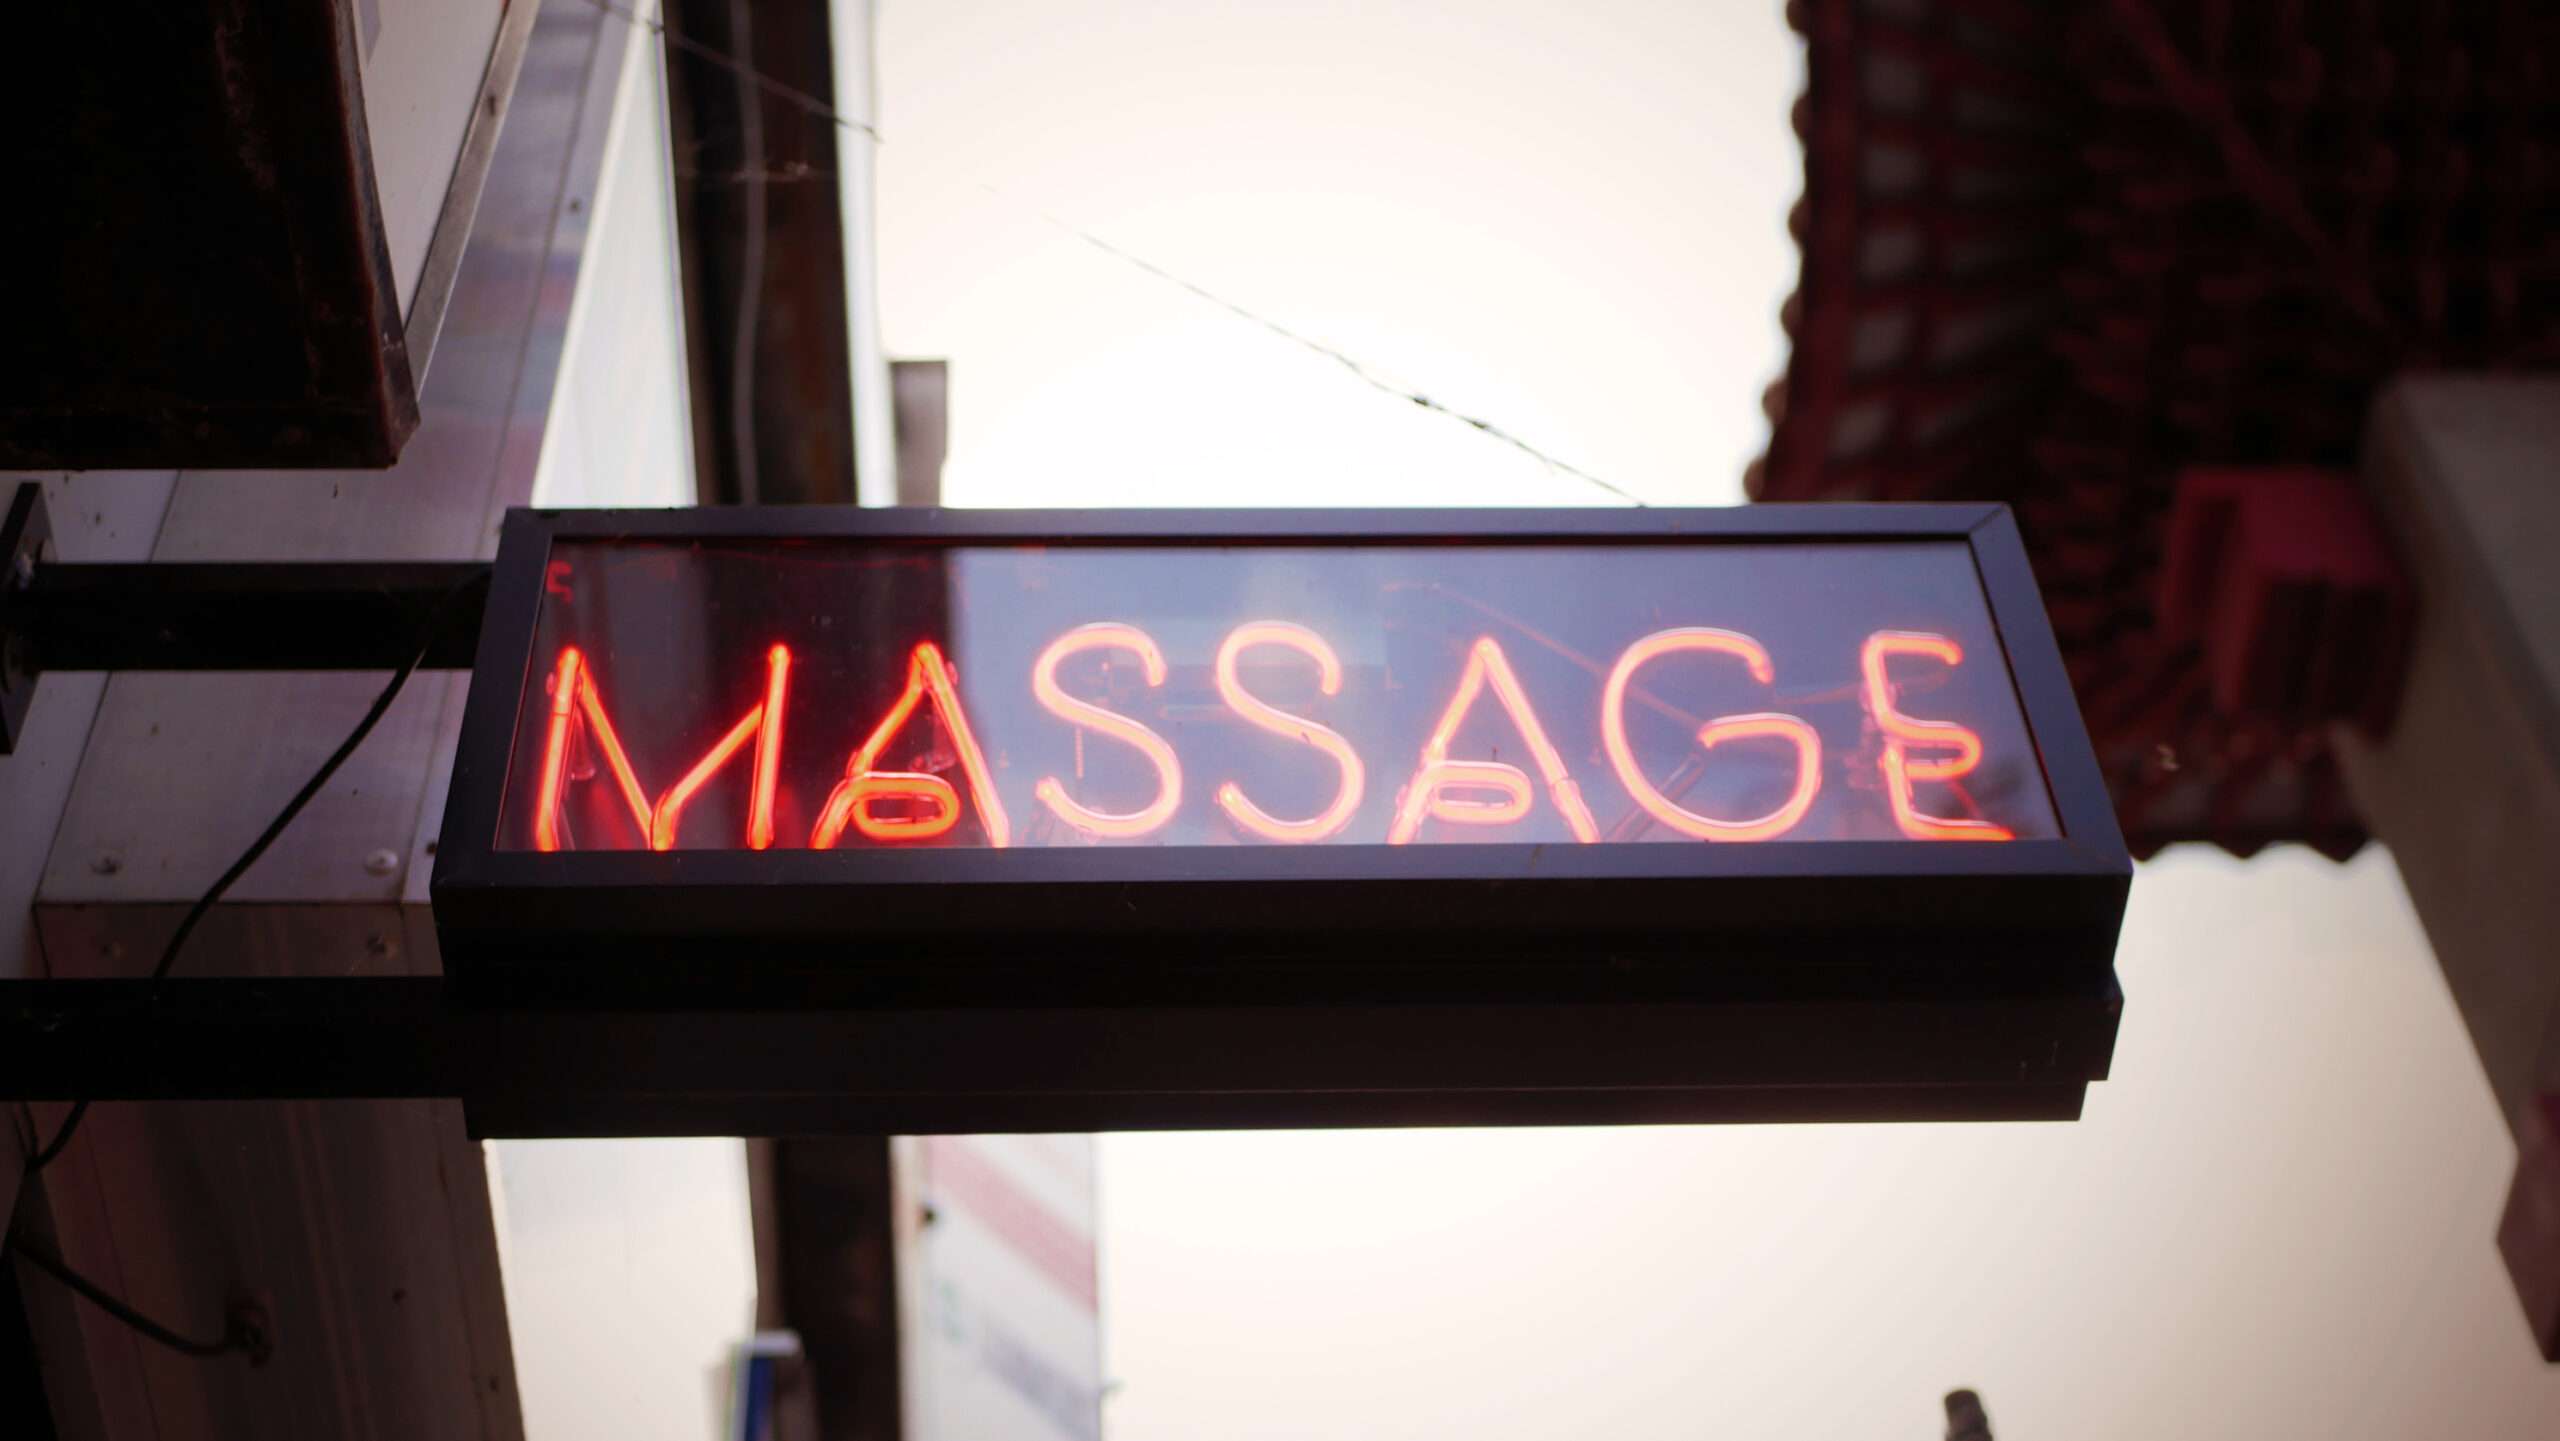  To Fight Human Trafficking, Police in Texas Town Endorse Zoning Restrictions on Massage Parlors 